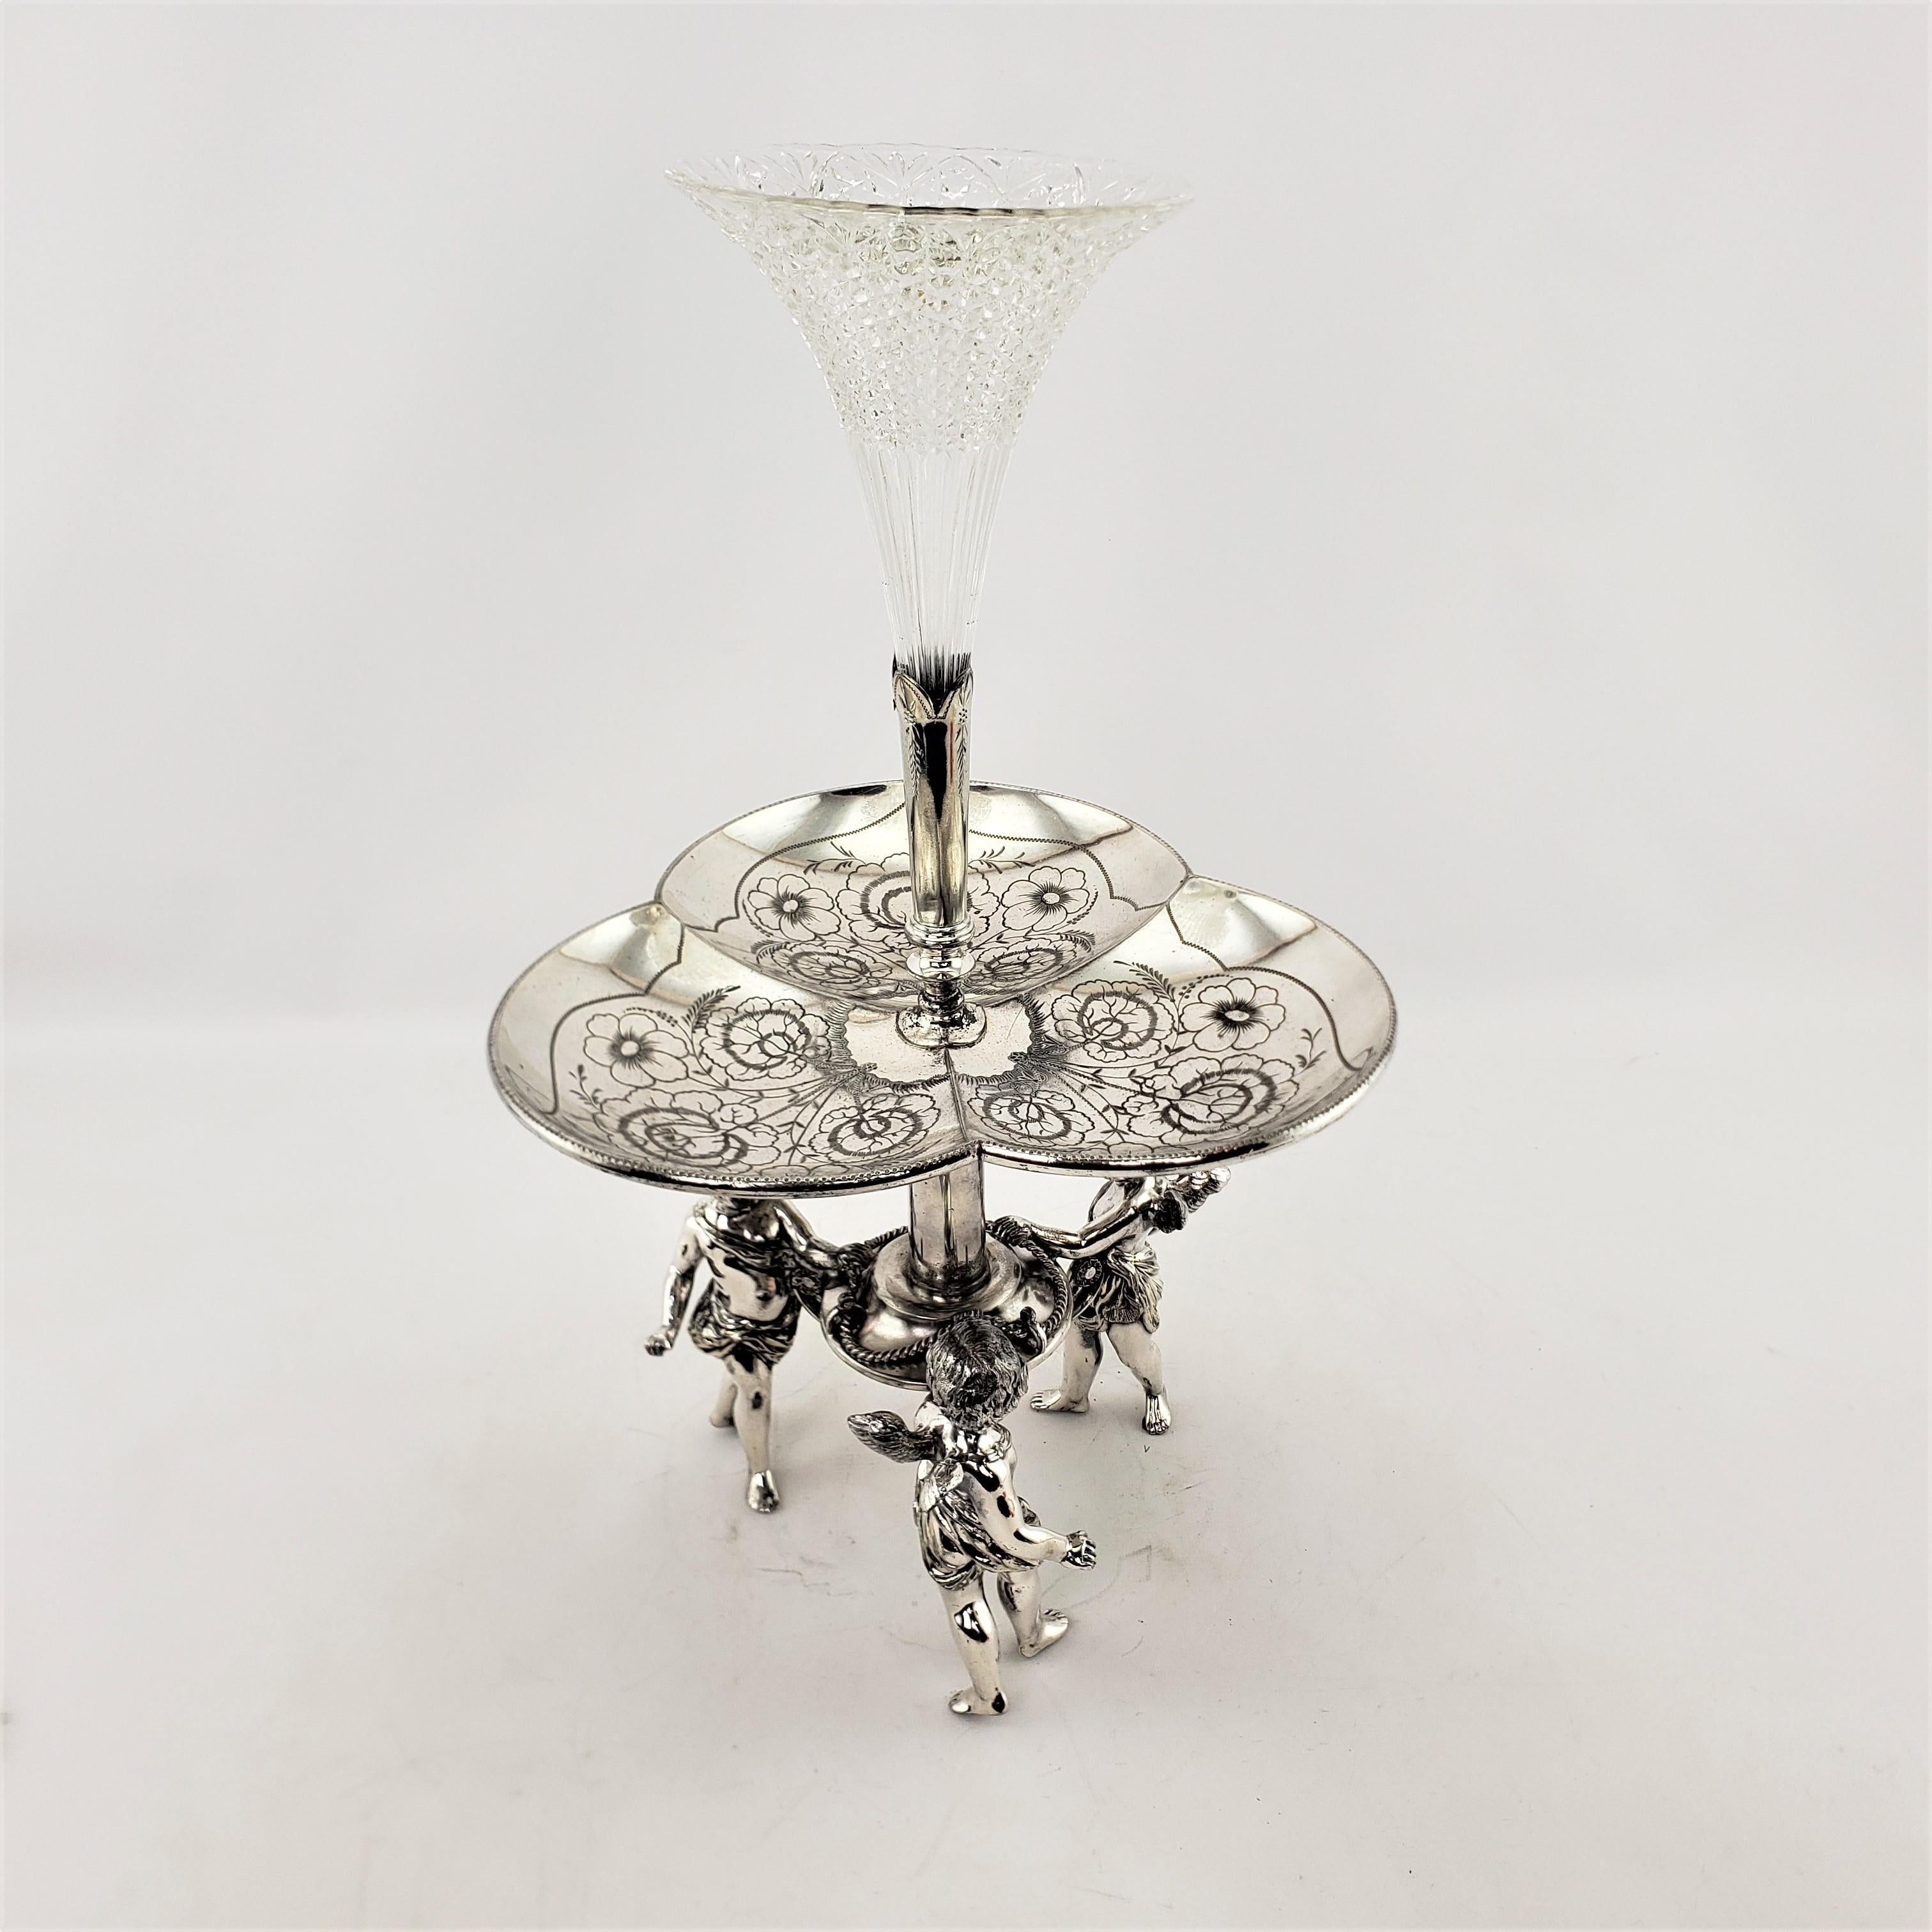 Antique Silver Plated Centerpiece or Epergne with Figural Children Playing In Good Condition For Sale In Hamilton, Ontario